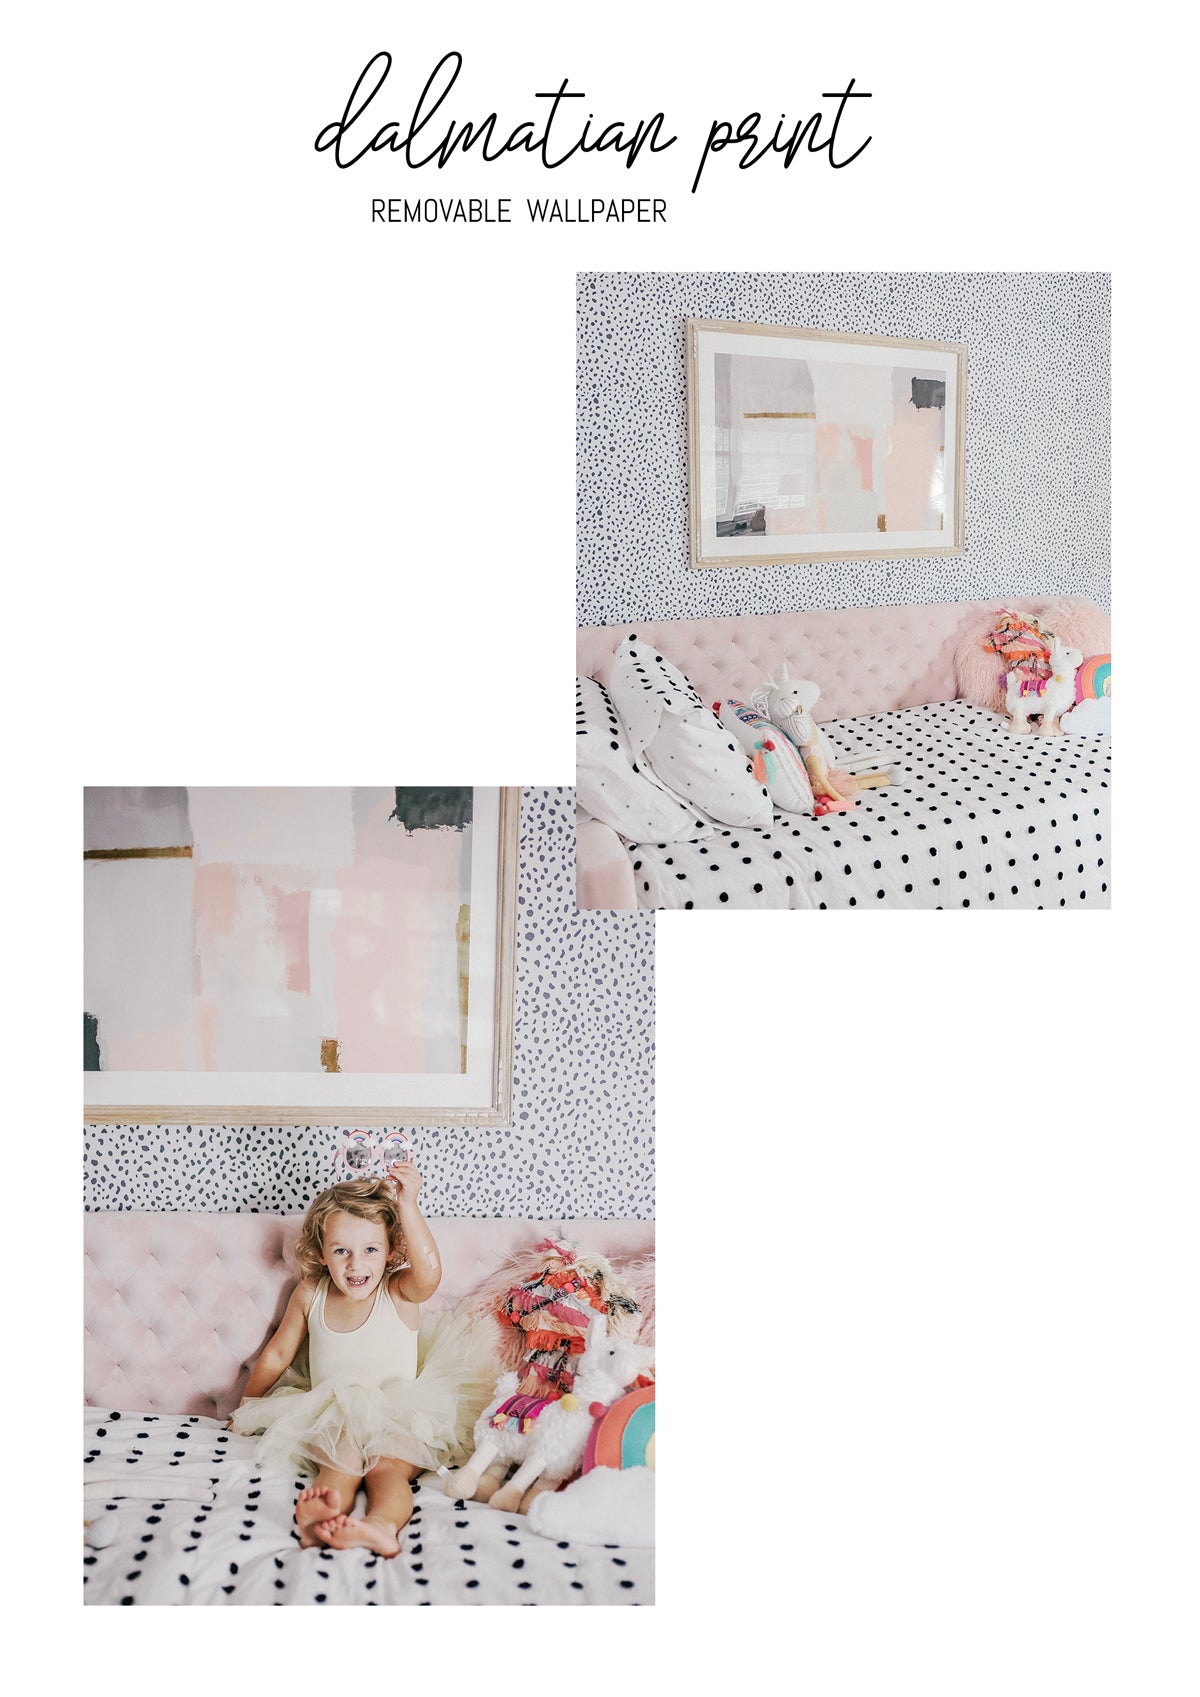 Glam girls room interior with dalmatian wallpaper and pink tufted bed